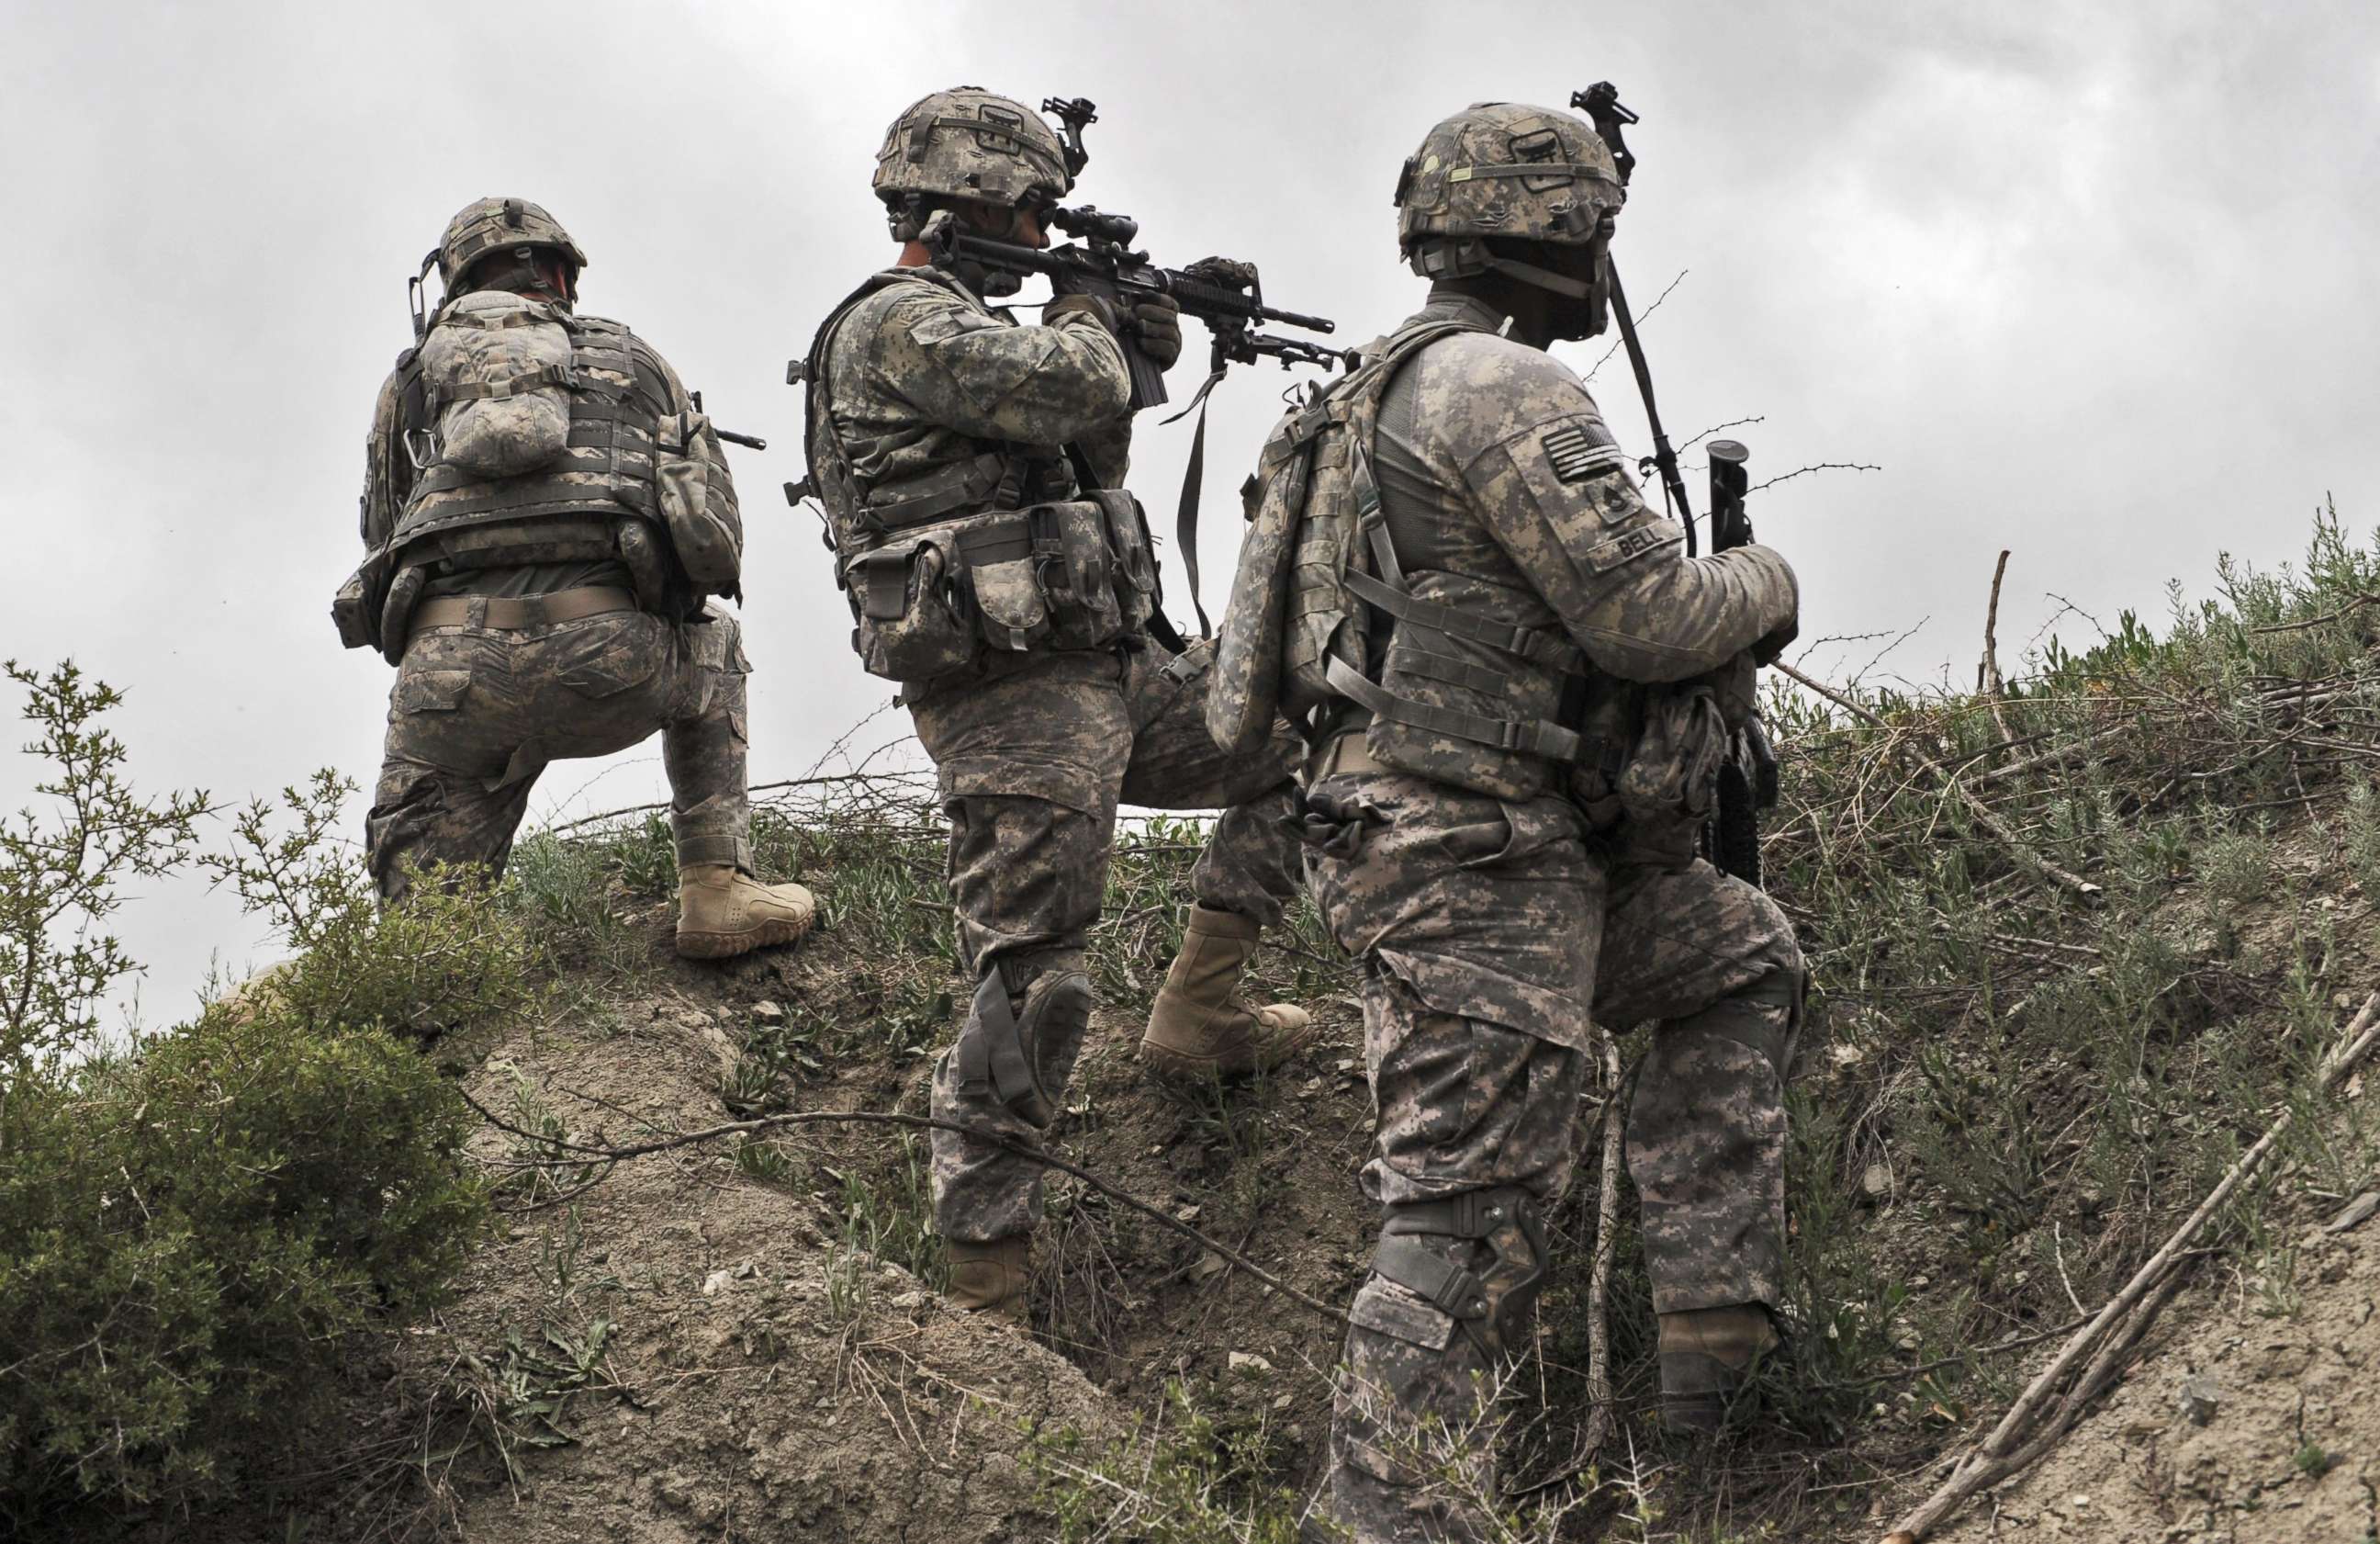 PHOTO: U.S. soldiers take position during a patrol in Ibrahim Khel village of Khost province in Afghanistan on April 11, 2010. 